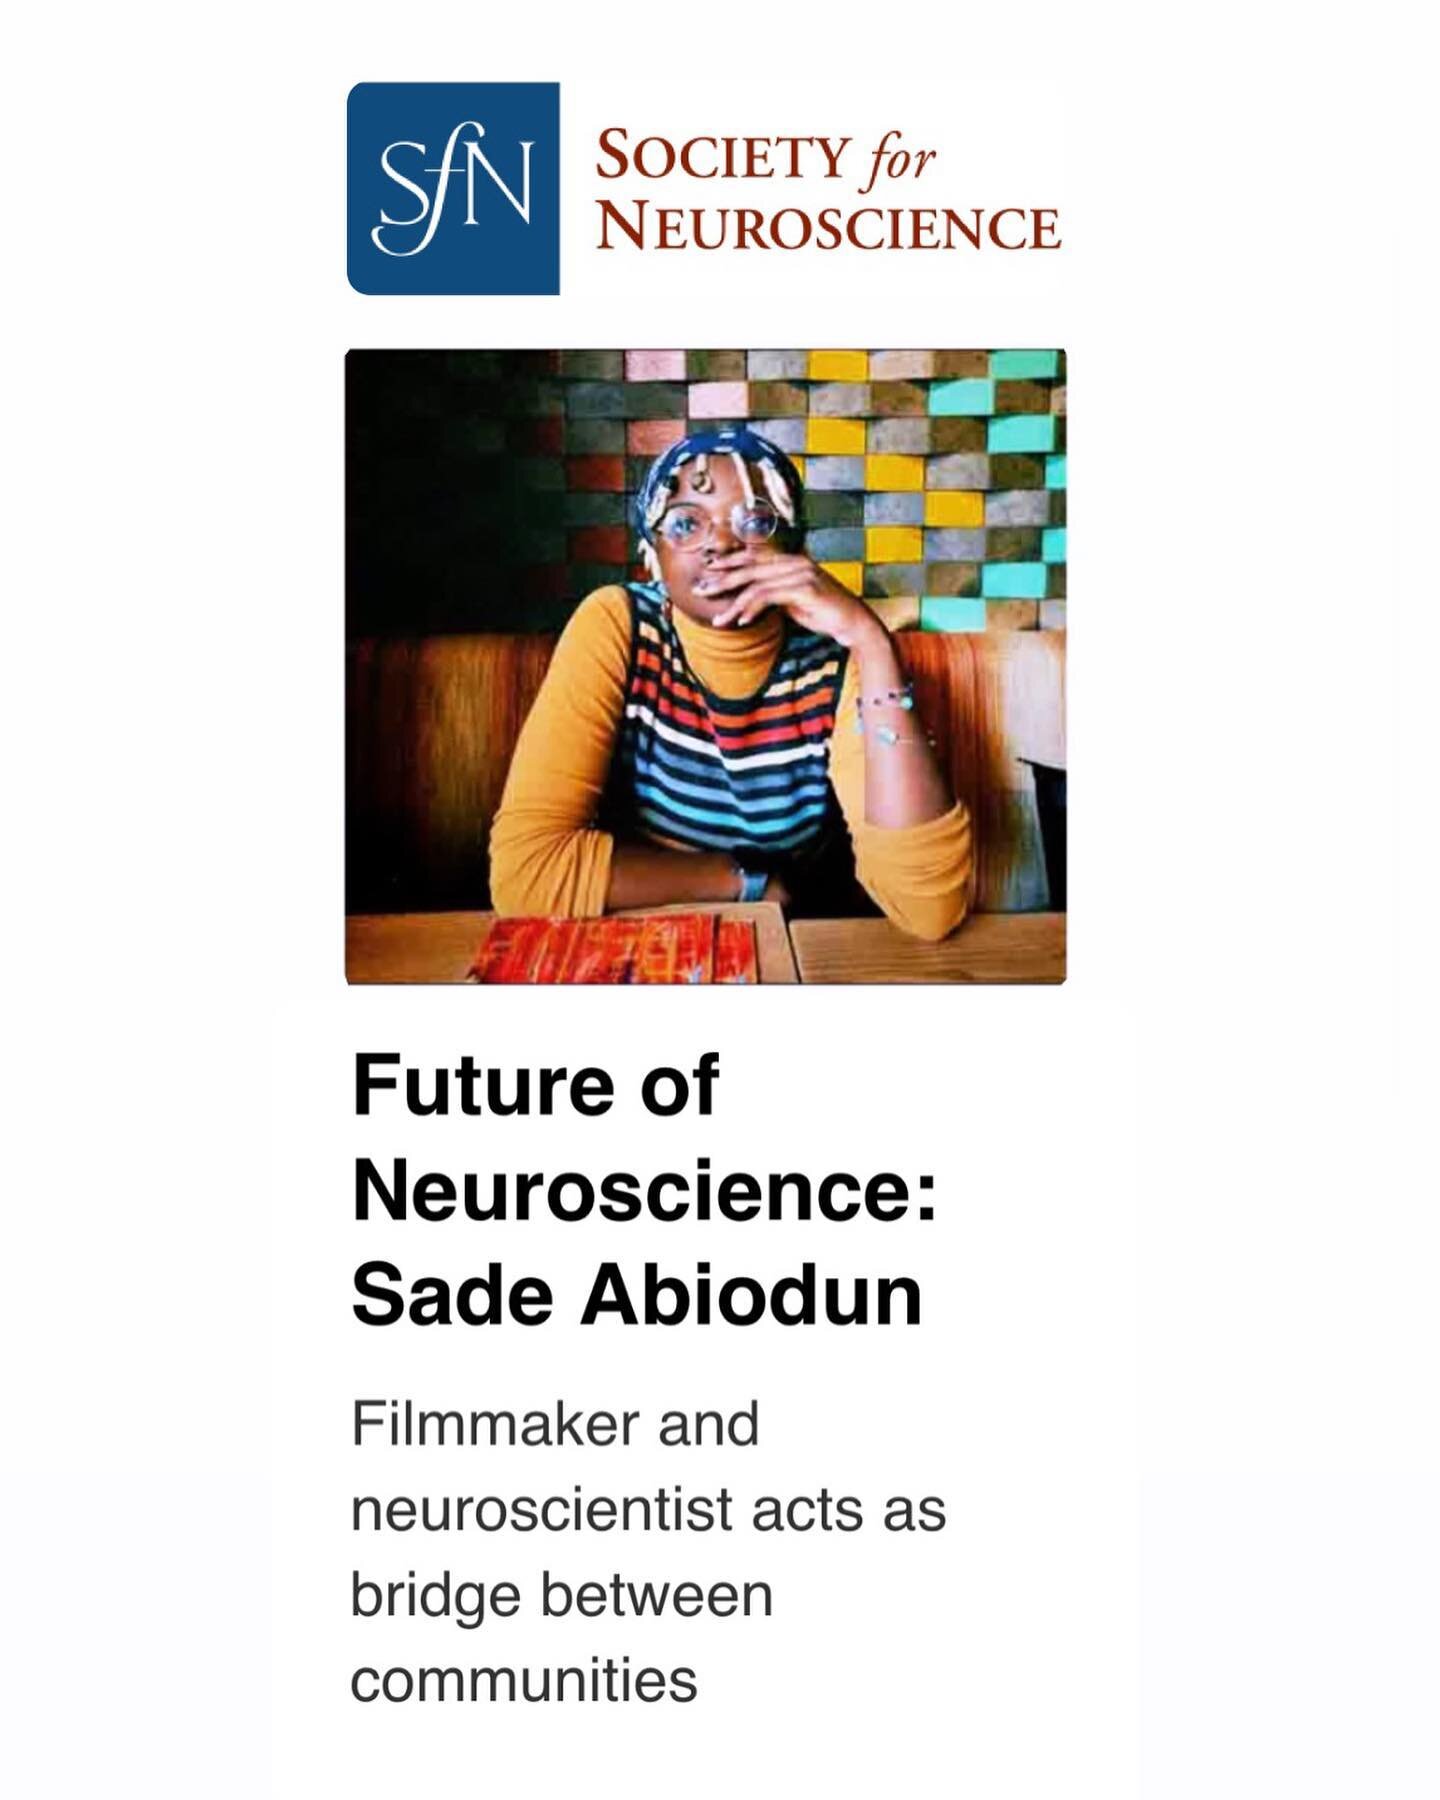 hi instagram, i missed you a little. 

beyond honored to be featured by @societyforneuroscience as part of their &lsquo;future of neuroscience&rsquo; series. 

i talk about my research, my practice, and some of the many adventures i&rsquo;ve gotten t